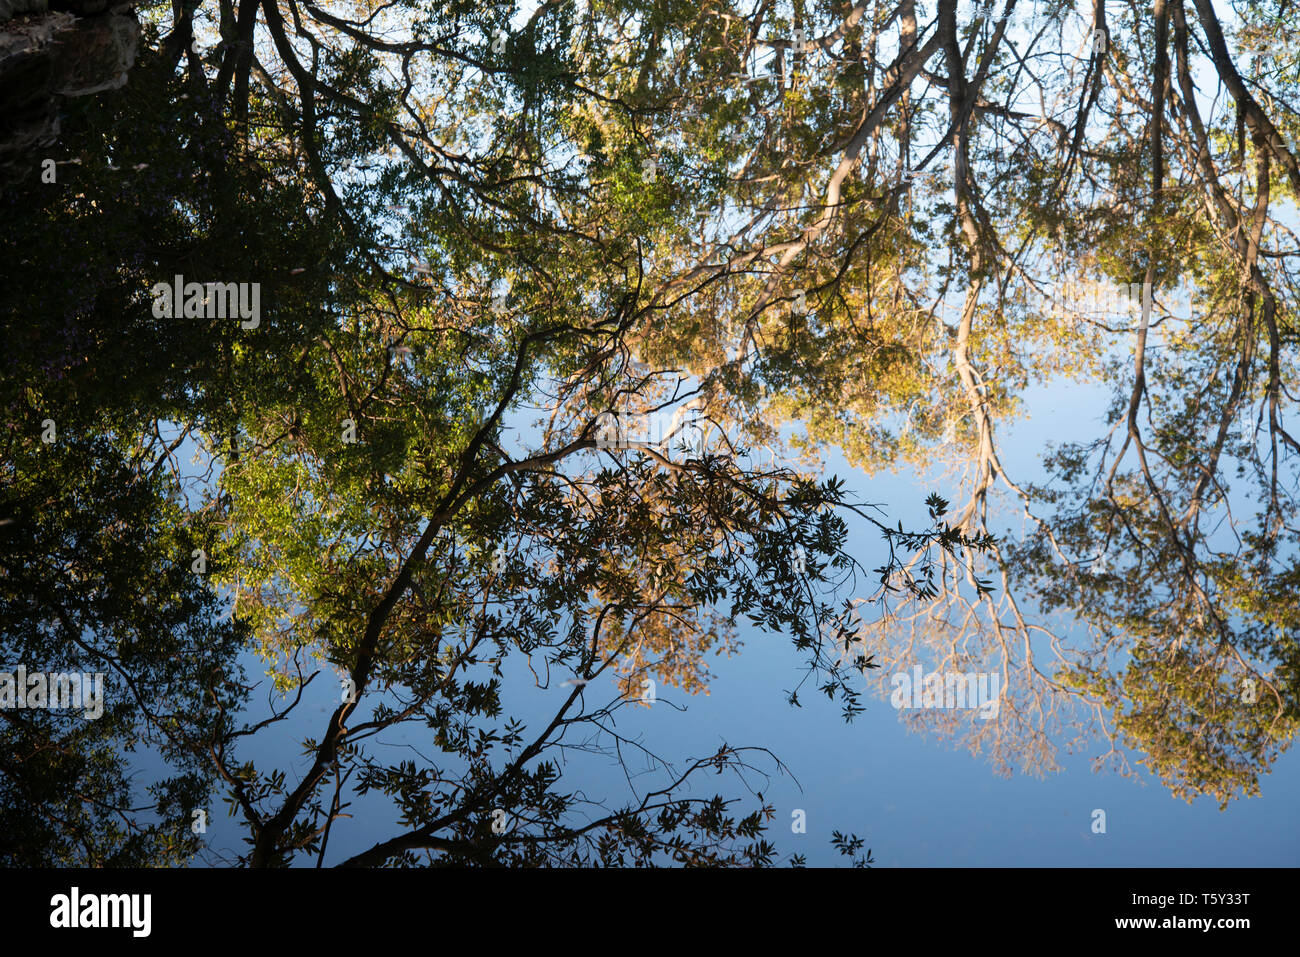 Johannesburg, South Africa, 27th April, 2019. Fall colored trees are reflected in a pond in The Wilds, a newly restored public park close to the city centre, on Saturday afternoon. Credit: Eva-Lotta Jansson/Alamy Stock Photo